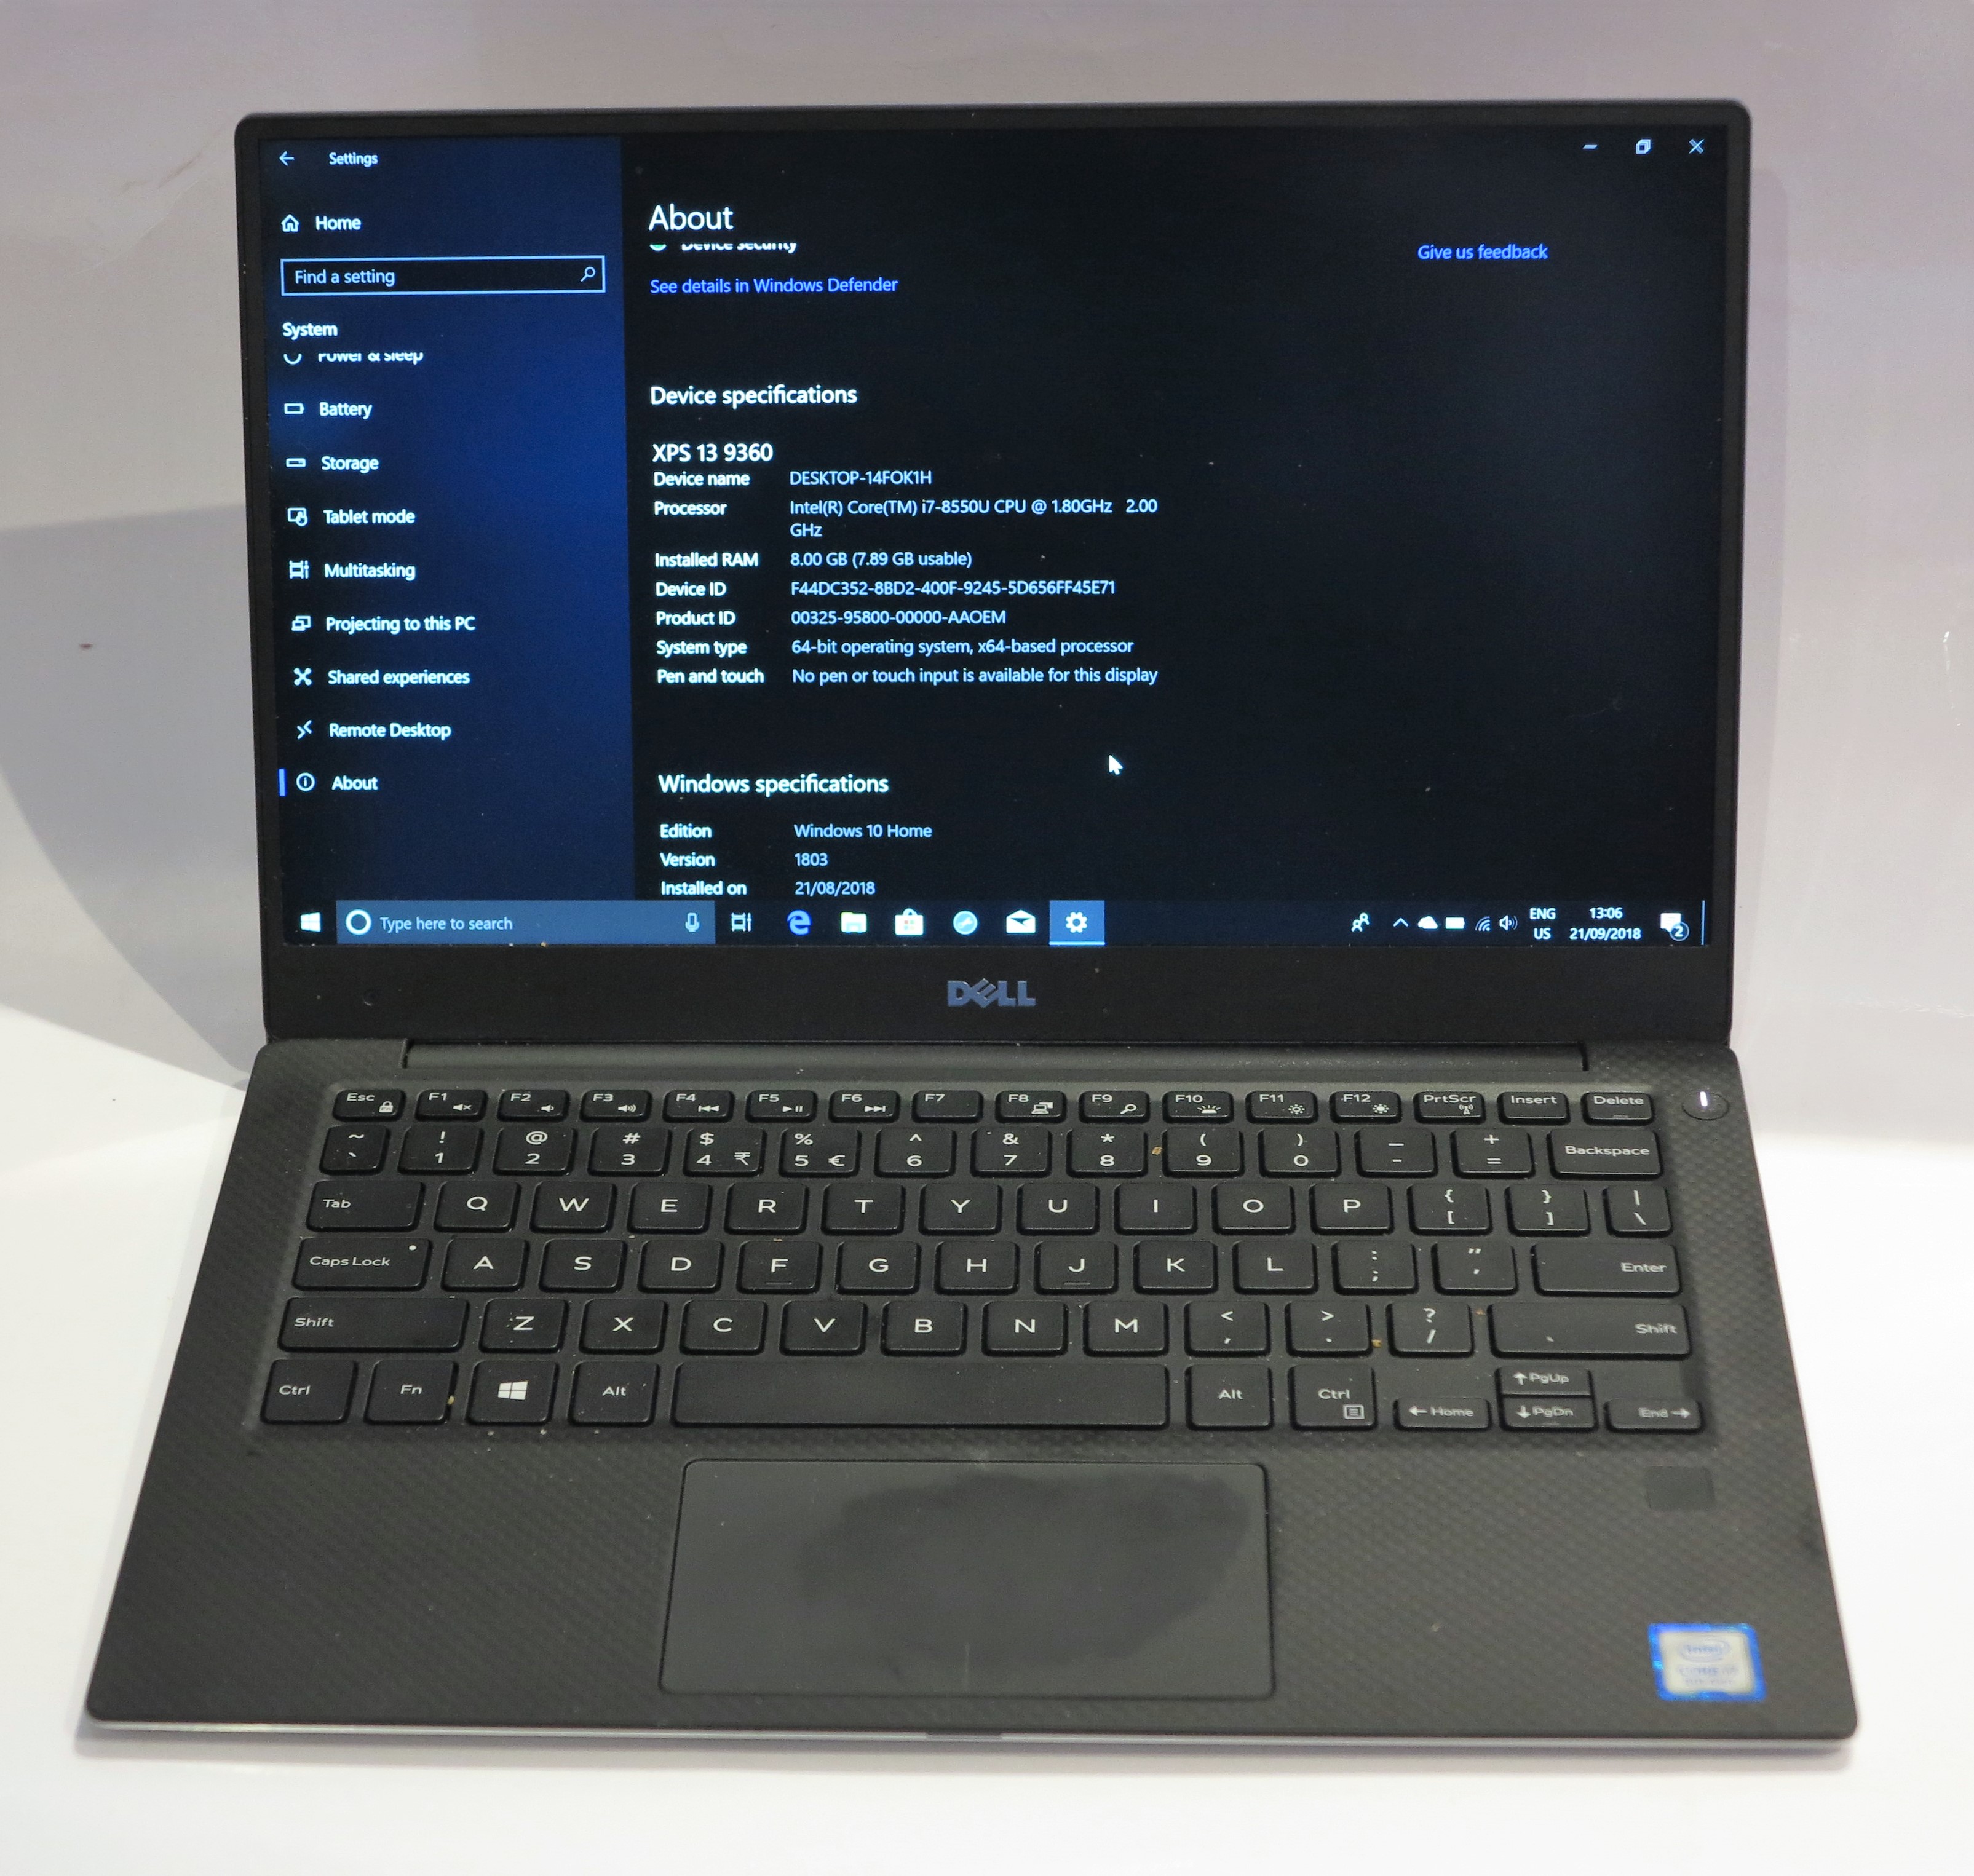 The Dell XPS 13 is now seen as the benchmark for Windows Ultrabooks